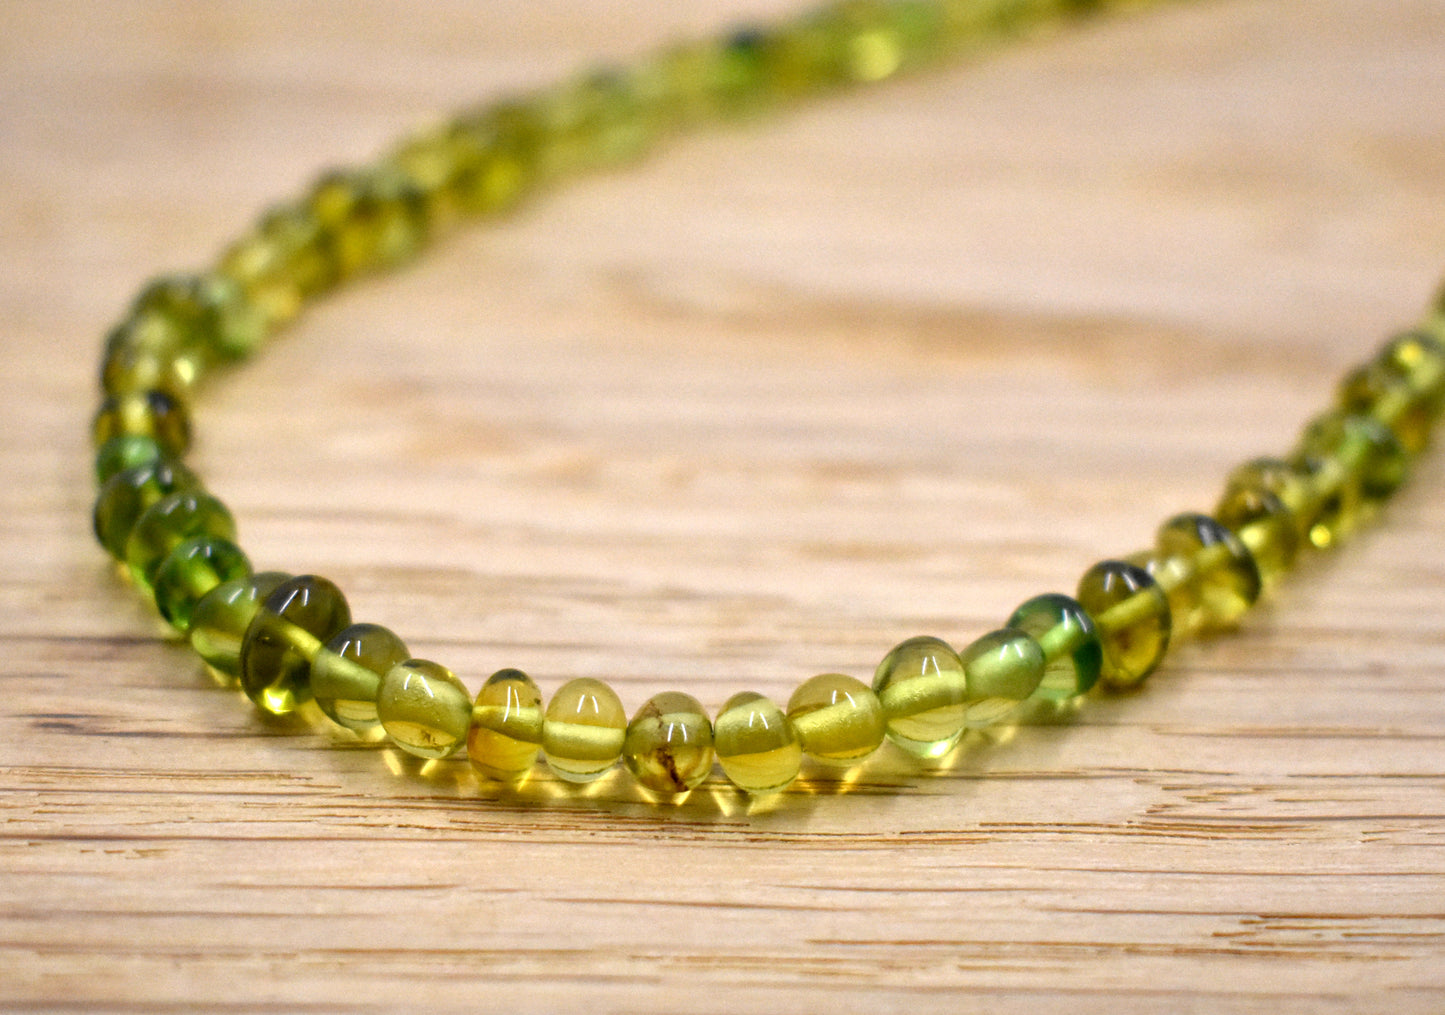 Caribbean amber necklace